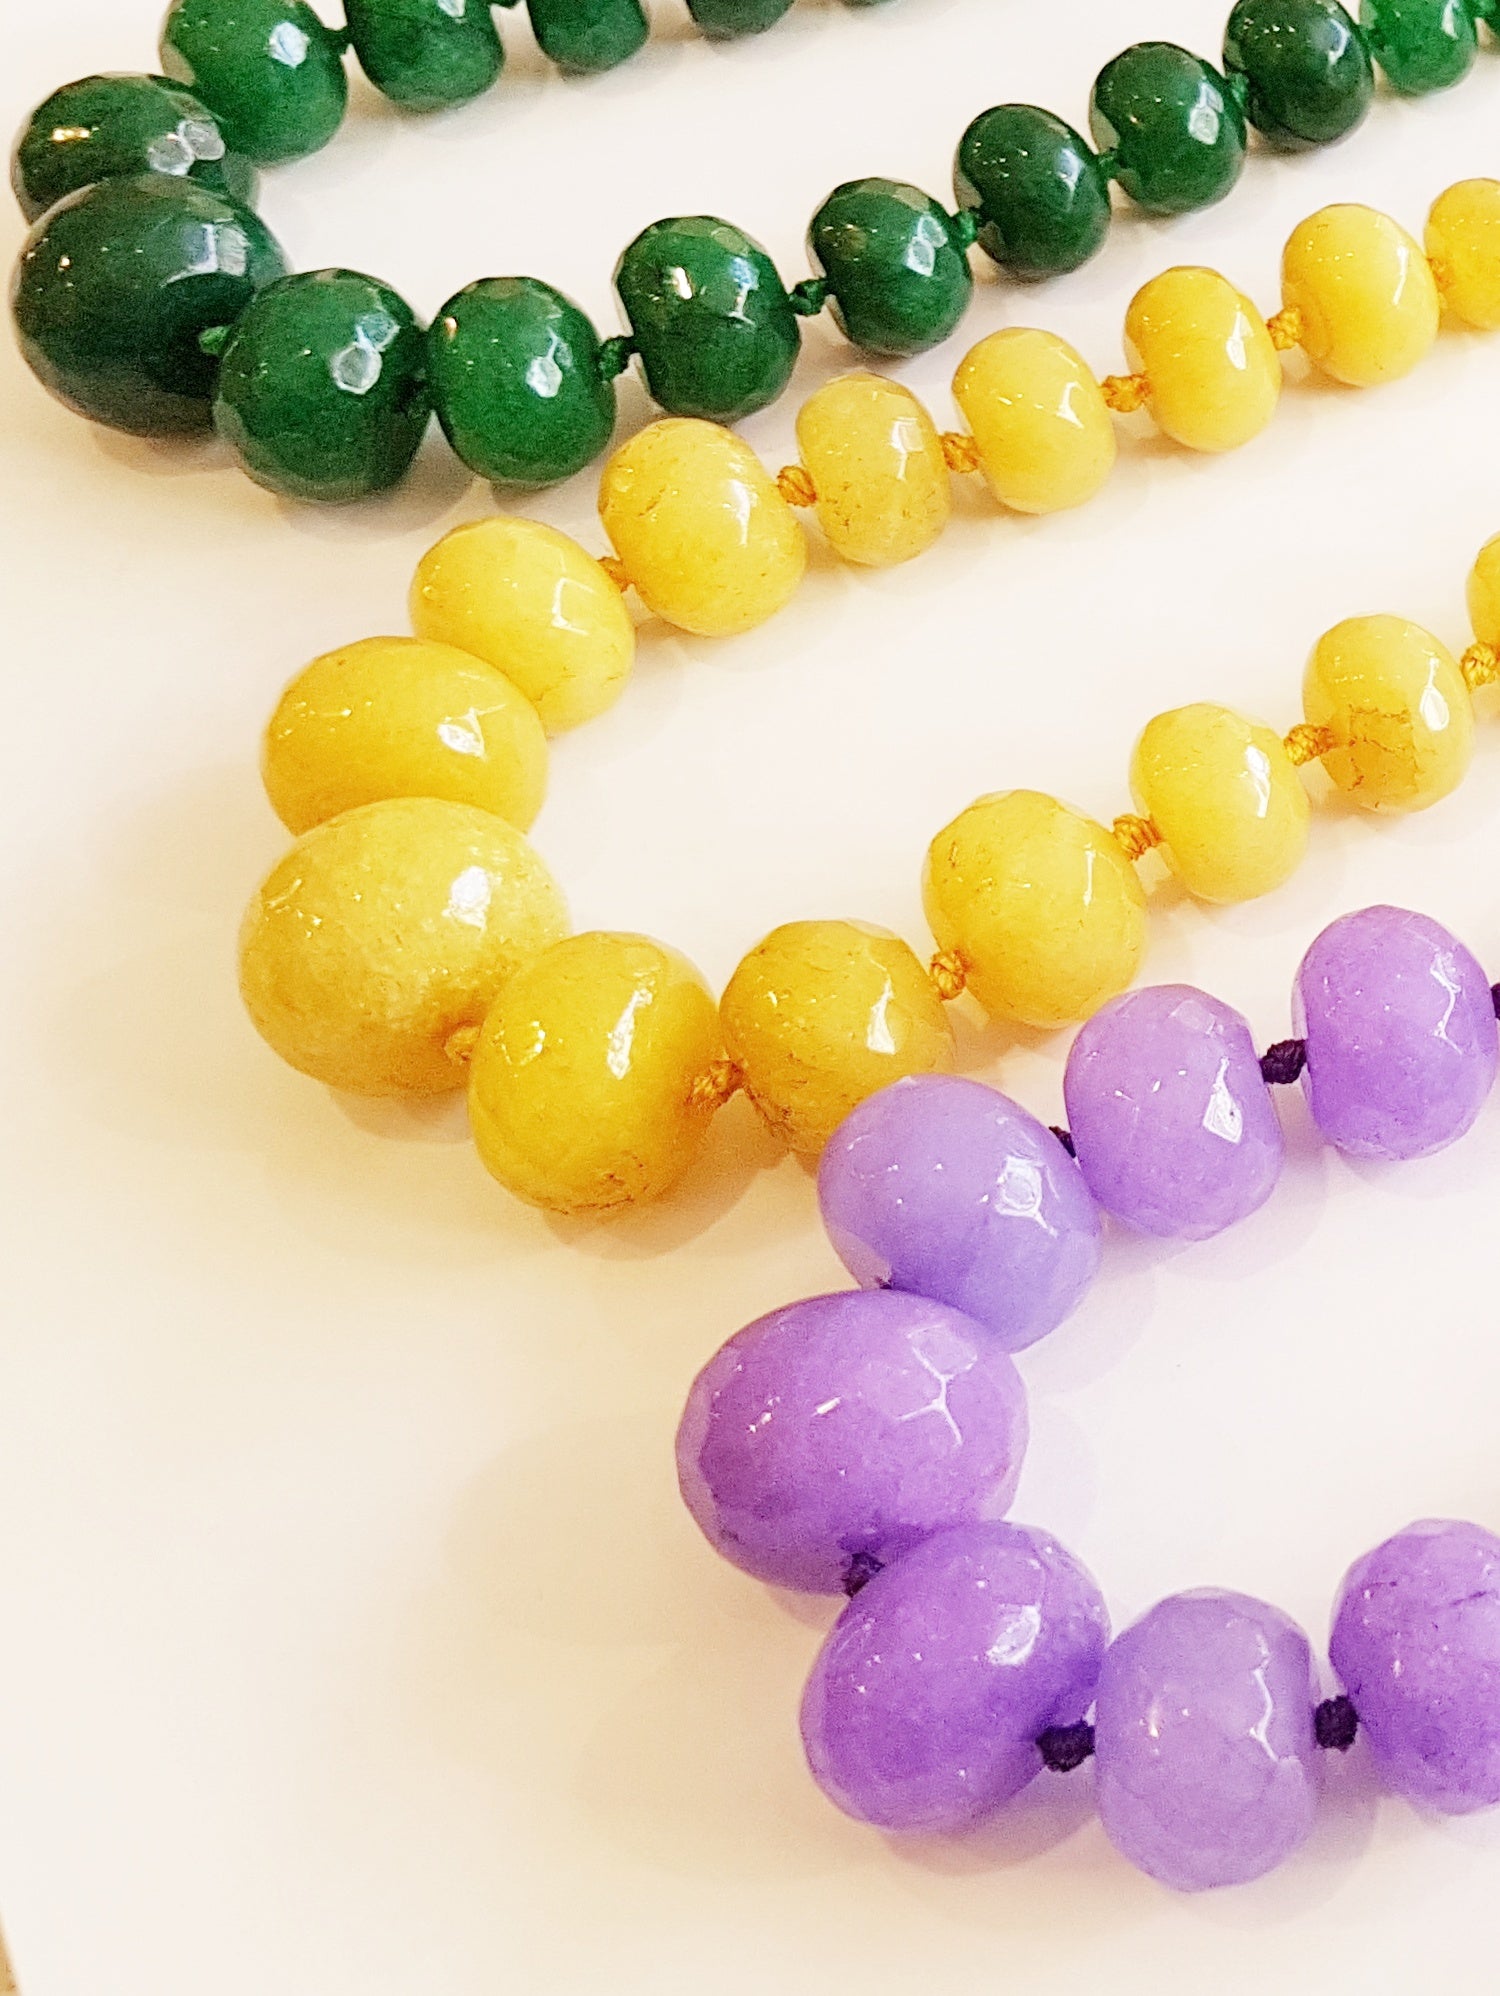 Lemon Jade' Chunky Statement Necklace - Speckled Earth